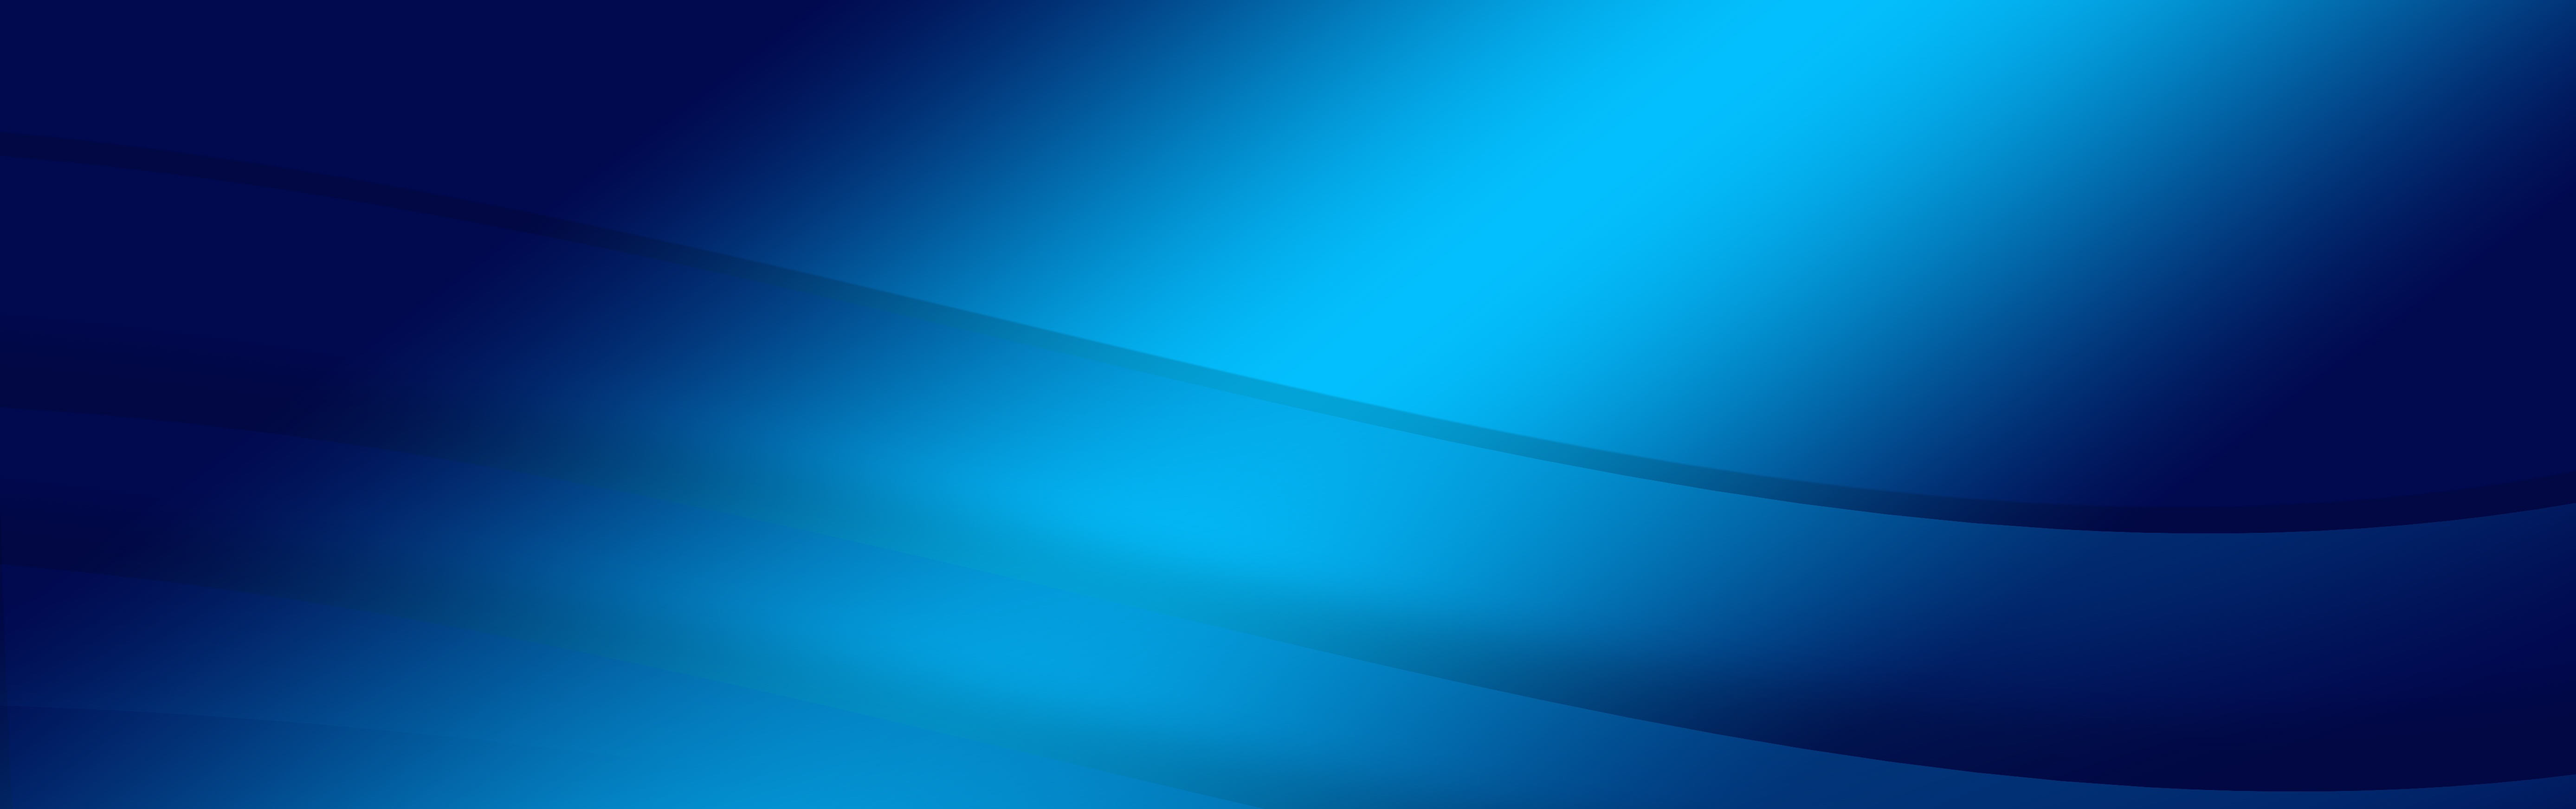 Blue banner with dark waves free image download